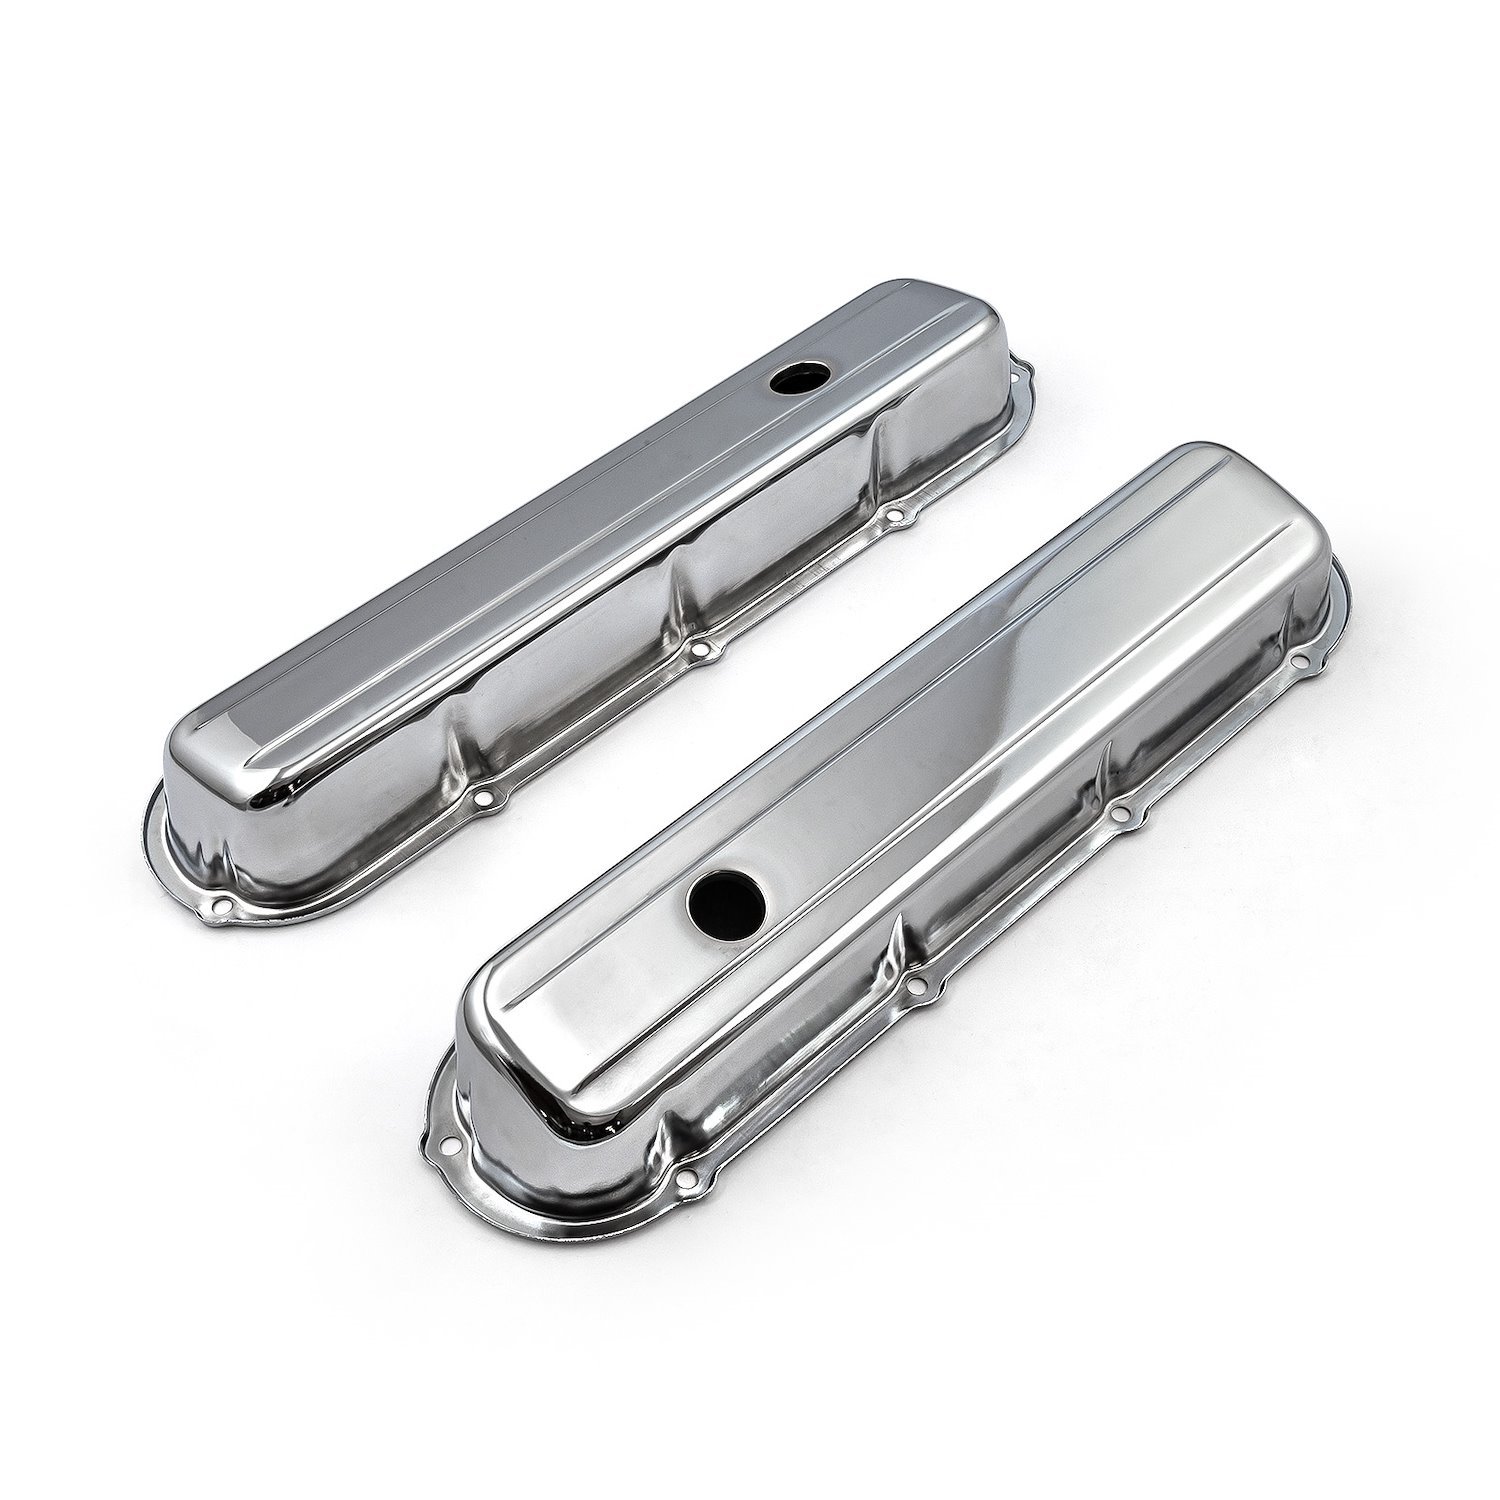 Stock Steel Valve Covers for 1968-1984 Cadillac 368,